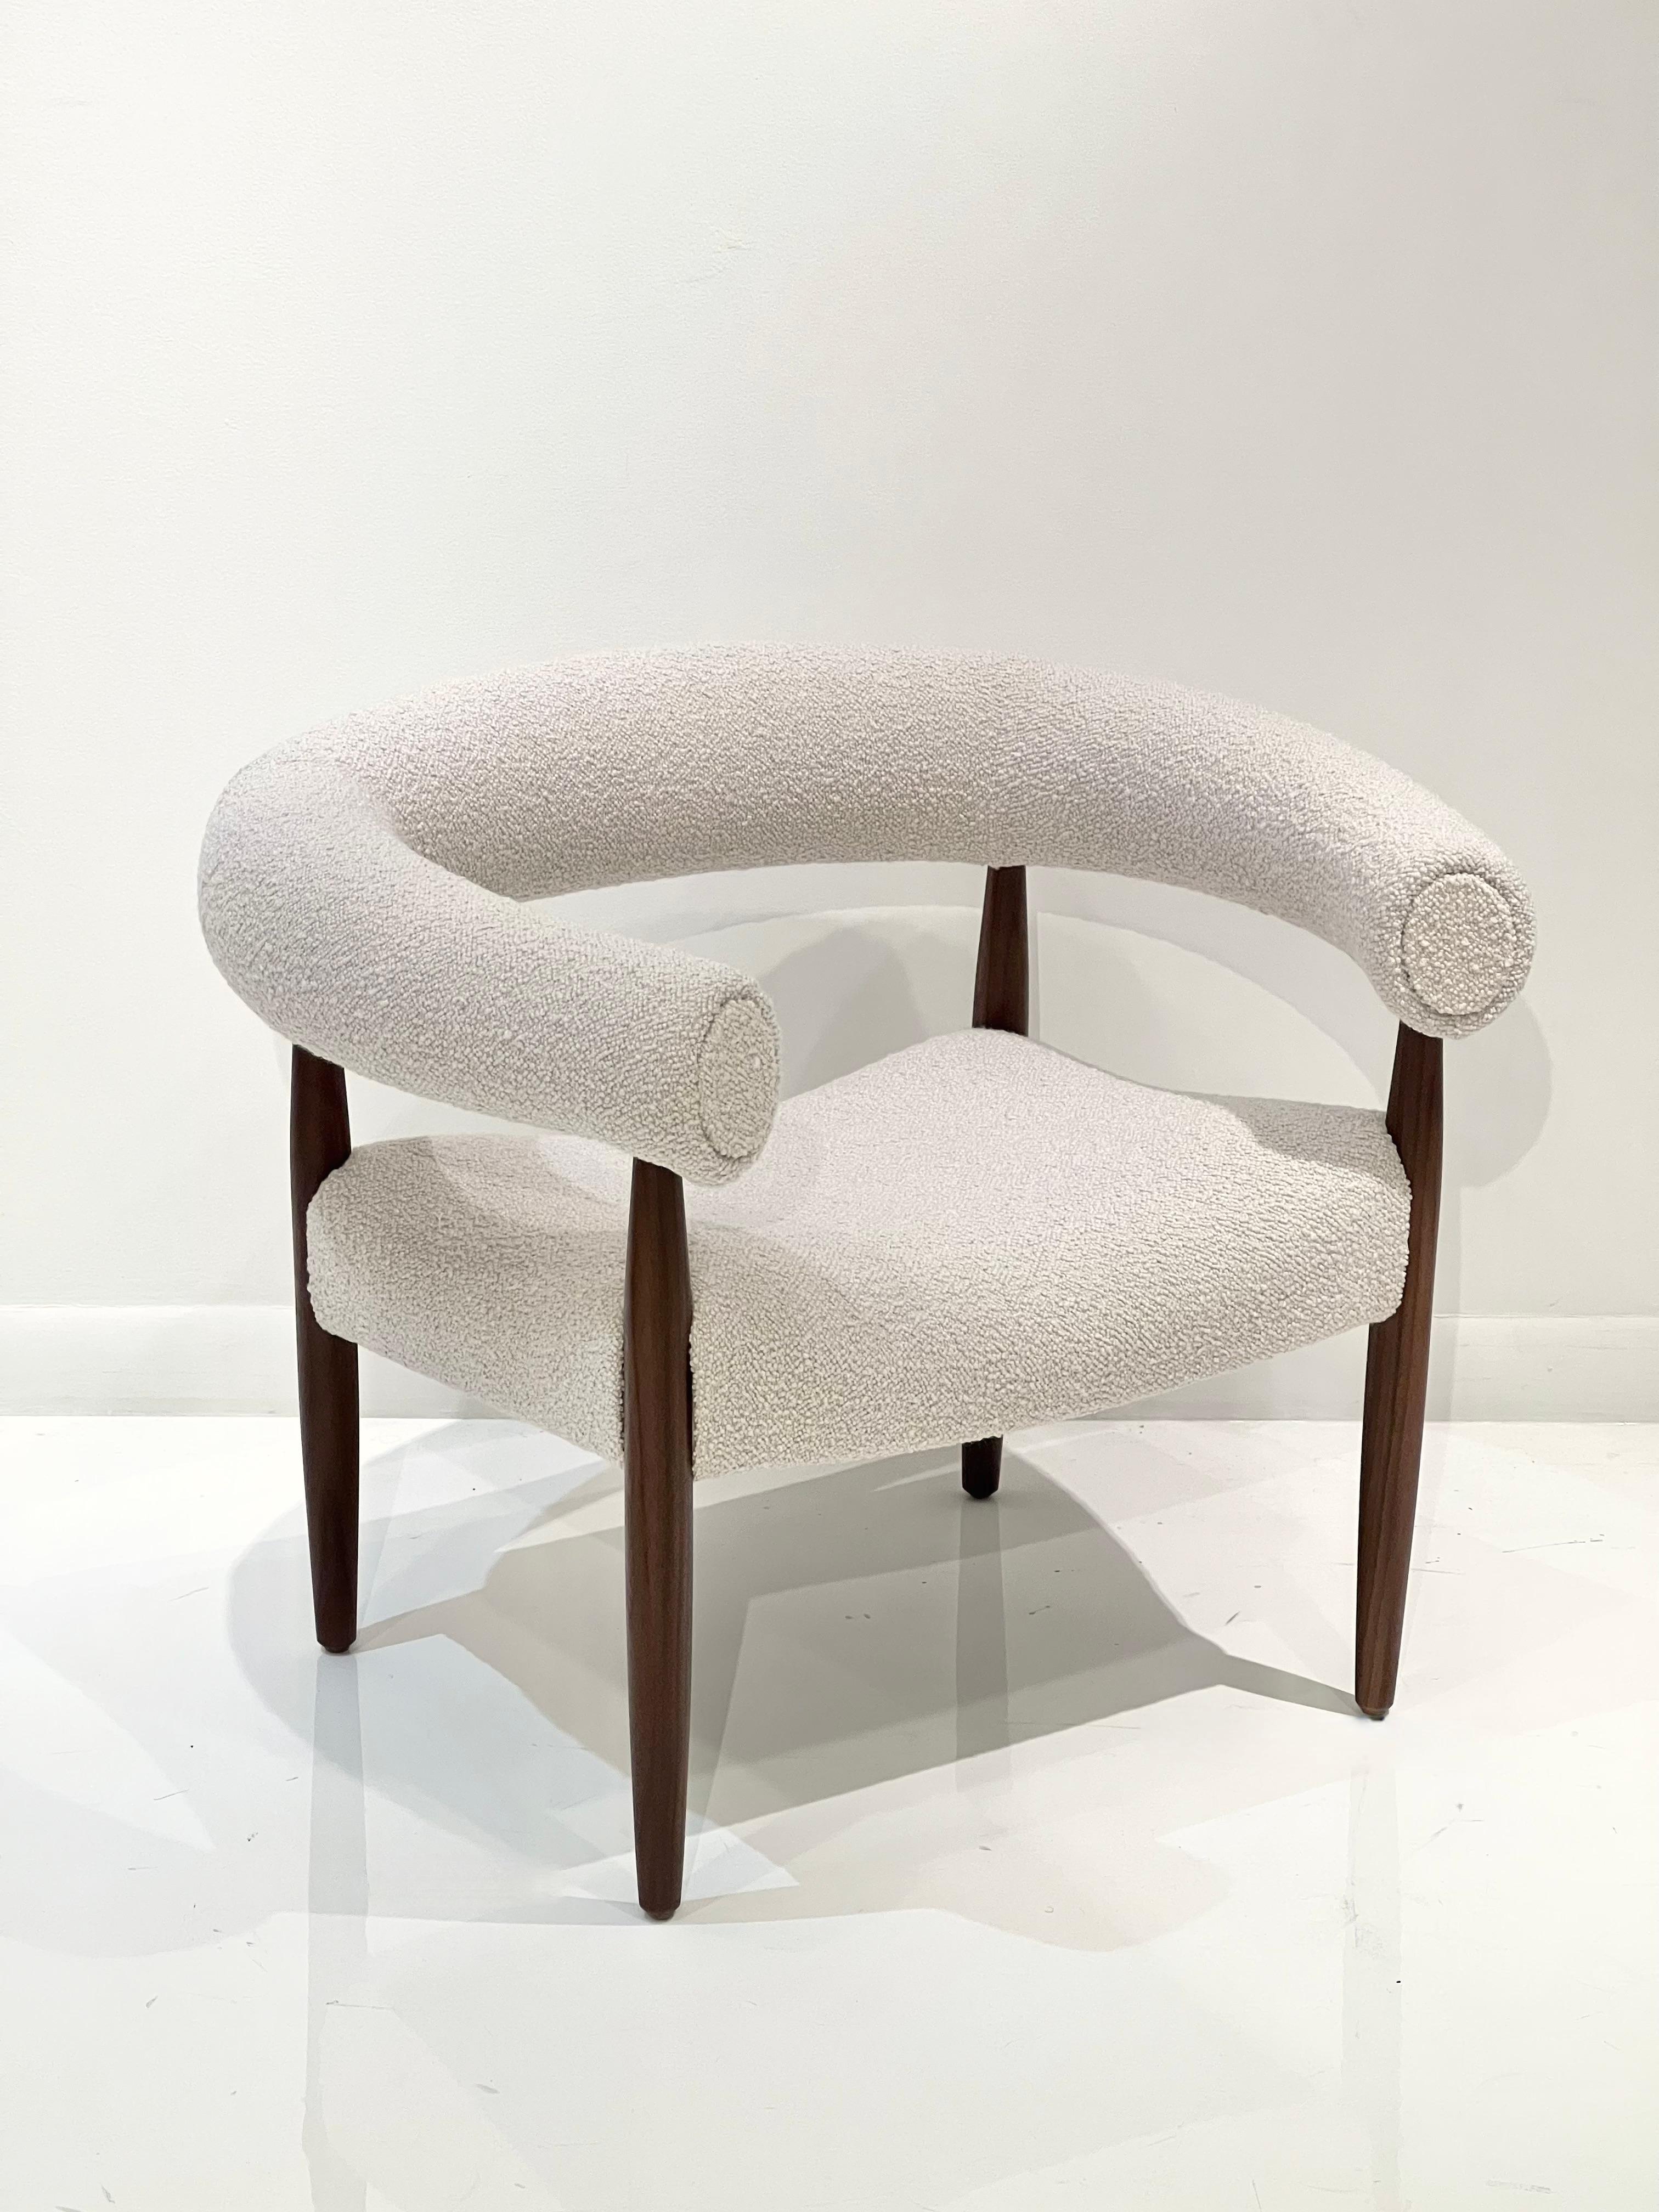 Ring chair in the style of Nanna Ditzel by Lost City Arts.
A wonderful and exceptionally comfortable lounge chair in the style of Nanna Ditzel. The original design is from 1958, Denmark. The upholstery is a light off-white fabric on a rich brown